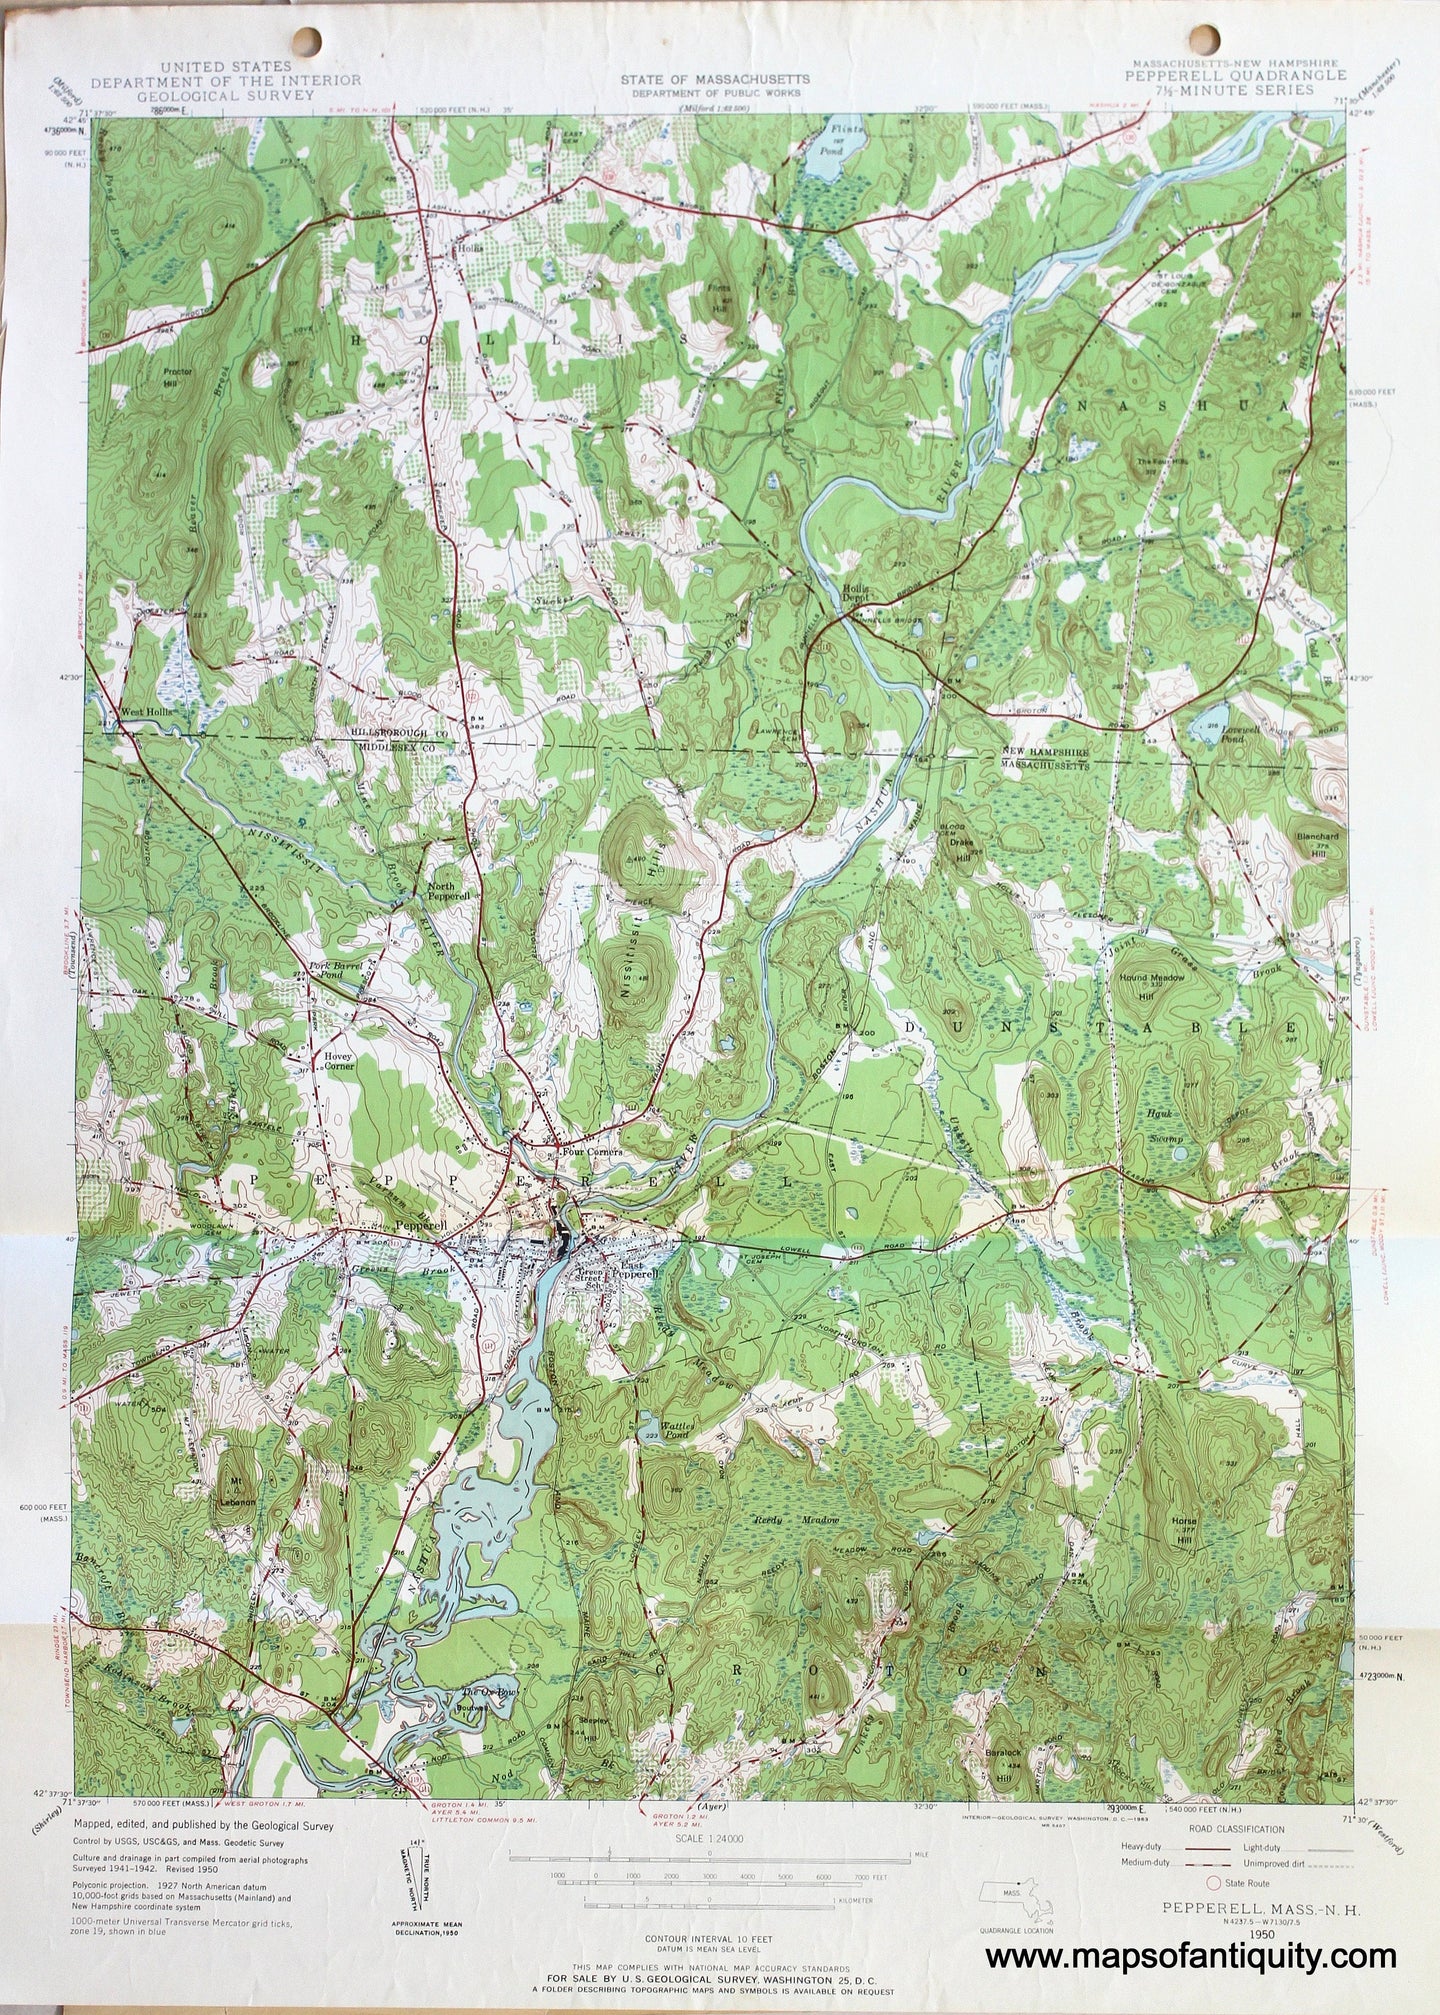 Genuine-Antique-Map-Pepperell-Massachusetts-New-Hampshire--1950-US-Geological-Survey--Maps-Of-Antiquity